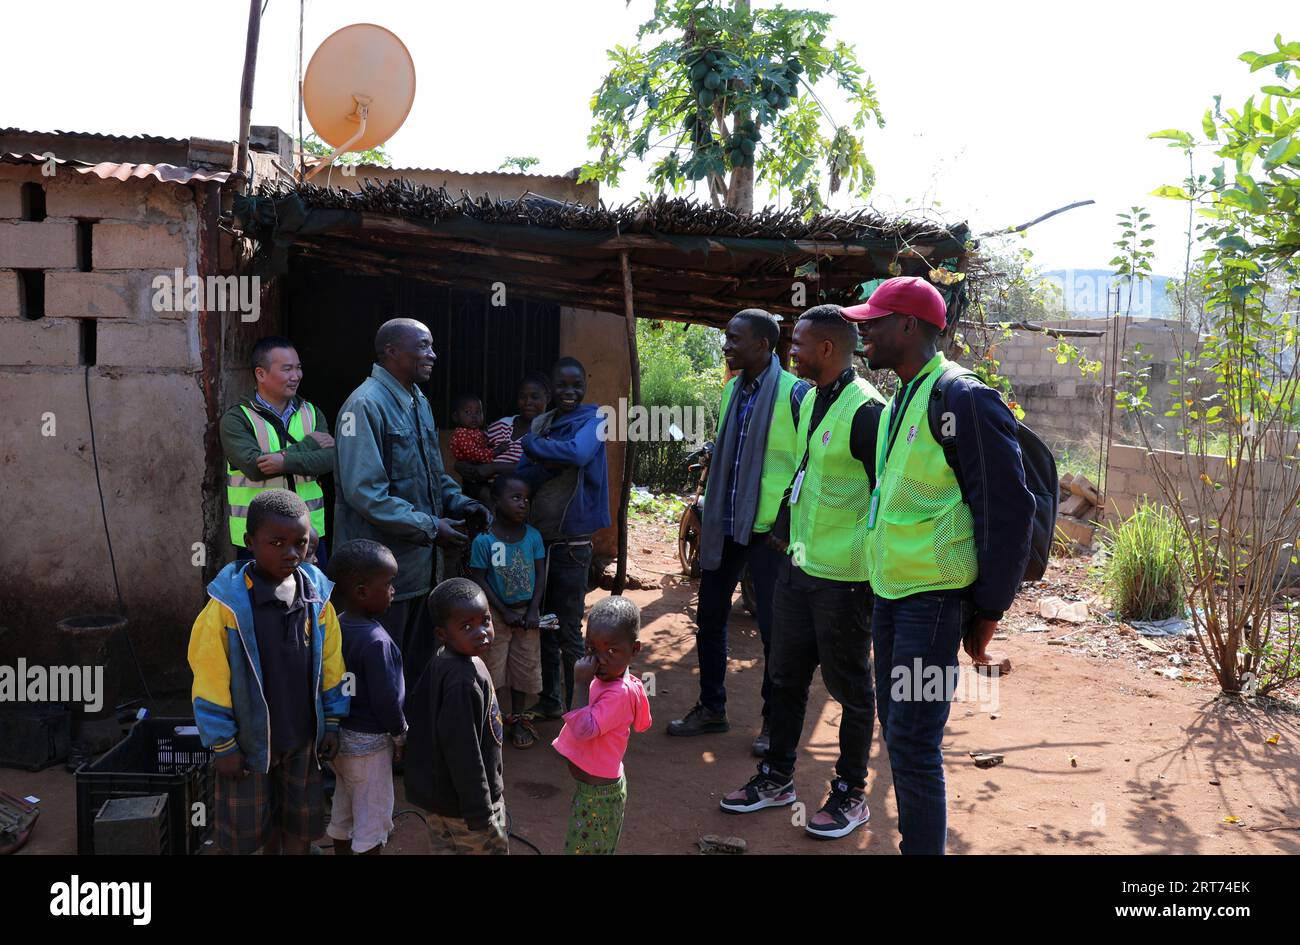 (230911) -- MAPUTO, Sept. 11, 2023 (Xinhua) -- Nunes Guardagea (2nd R) and his colleagues communicate with villagers who use Chinese-aided satellite television devices in Goba Village, Maputo Province, Mozambique, July 26, 2023. Government of Mozambique announced in May 2020 the completion of a project to bring digital satellite television signal to 1,000 villages in the country, which has benefited over 20,000 families. The project, covering all the ten provinces and the capital city of Mozambique, was co-funded by China and implemented by the Chinese electronics and media company StarTimes Stock Photo